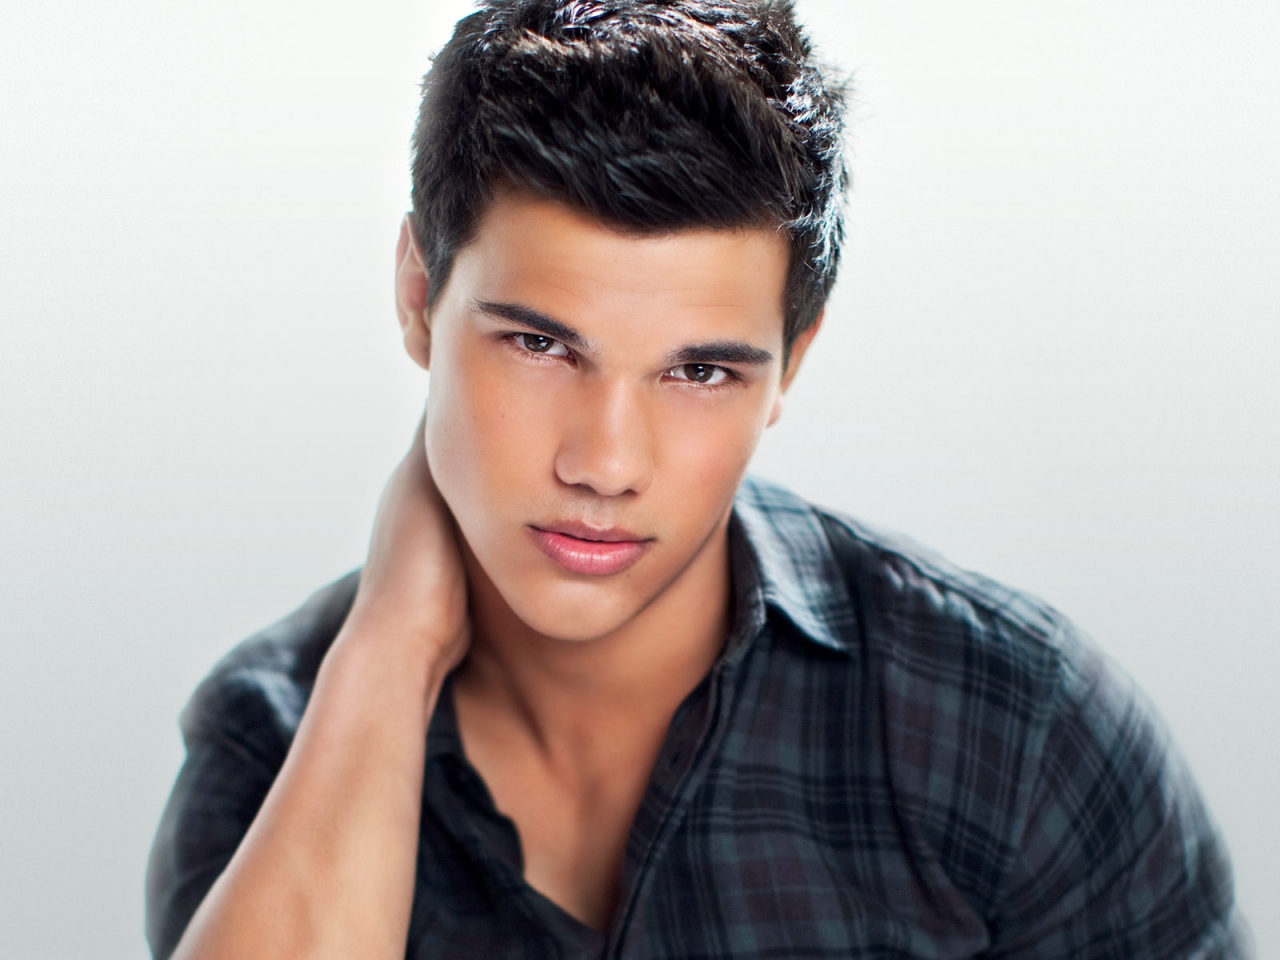 Taylor Lautner Actor for 1280 x 960 resolution